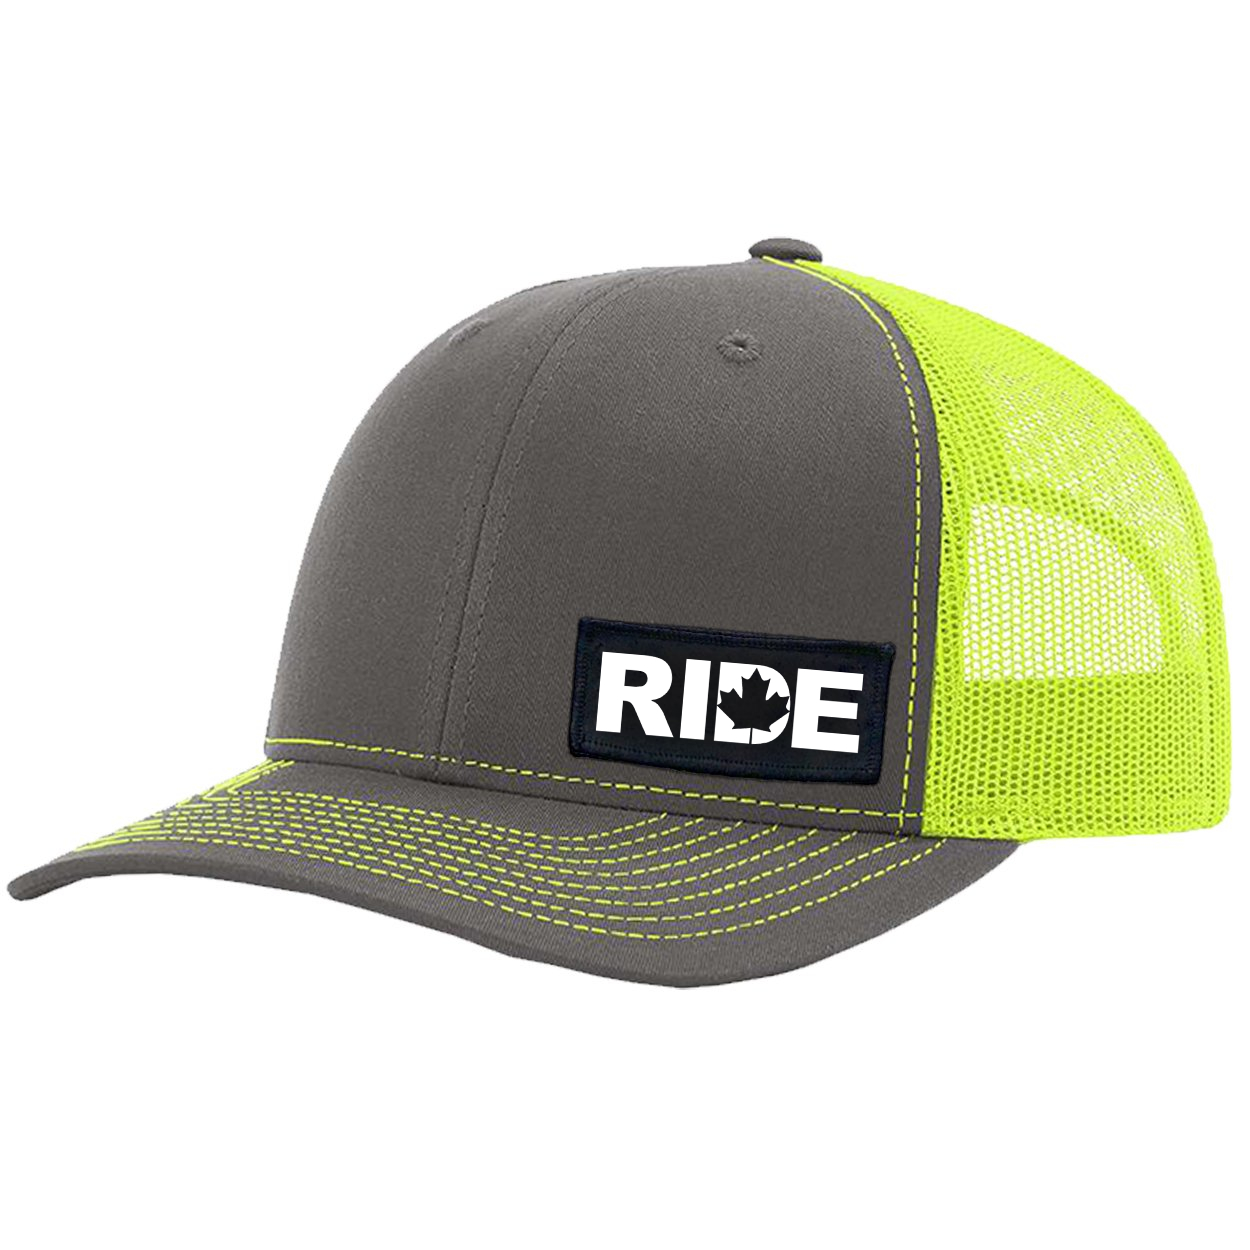 Ride Canada Night Out Woven Patch Snapback Trucker Hat Charcoal/Neon Yellow (White Logo)